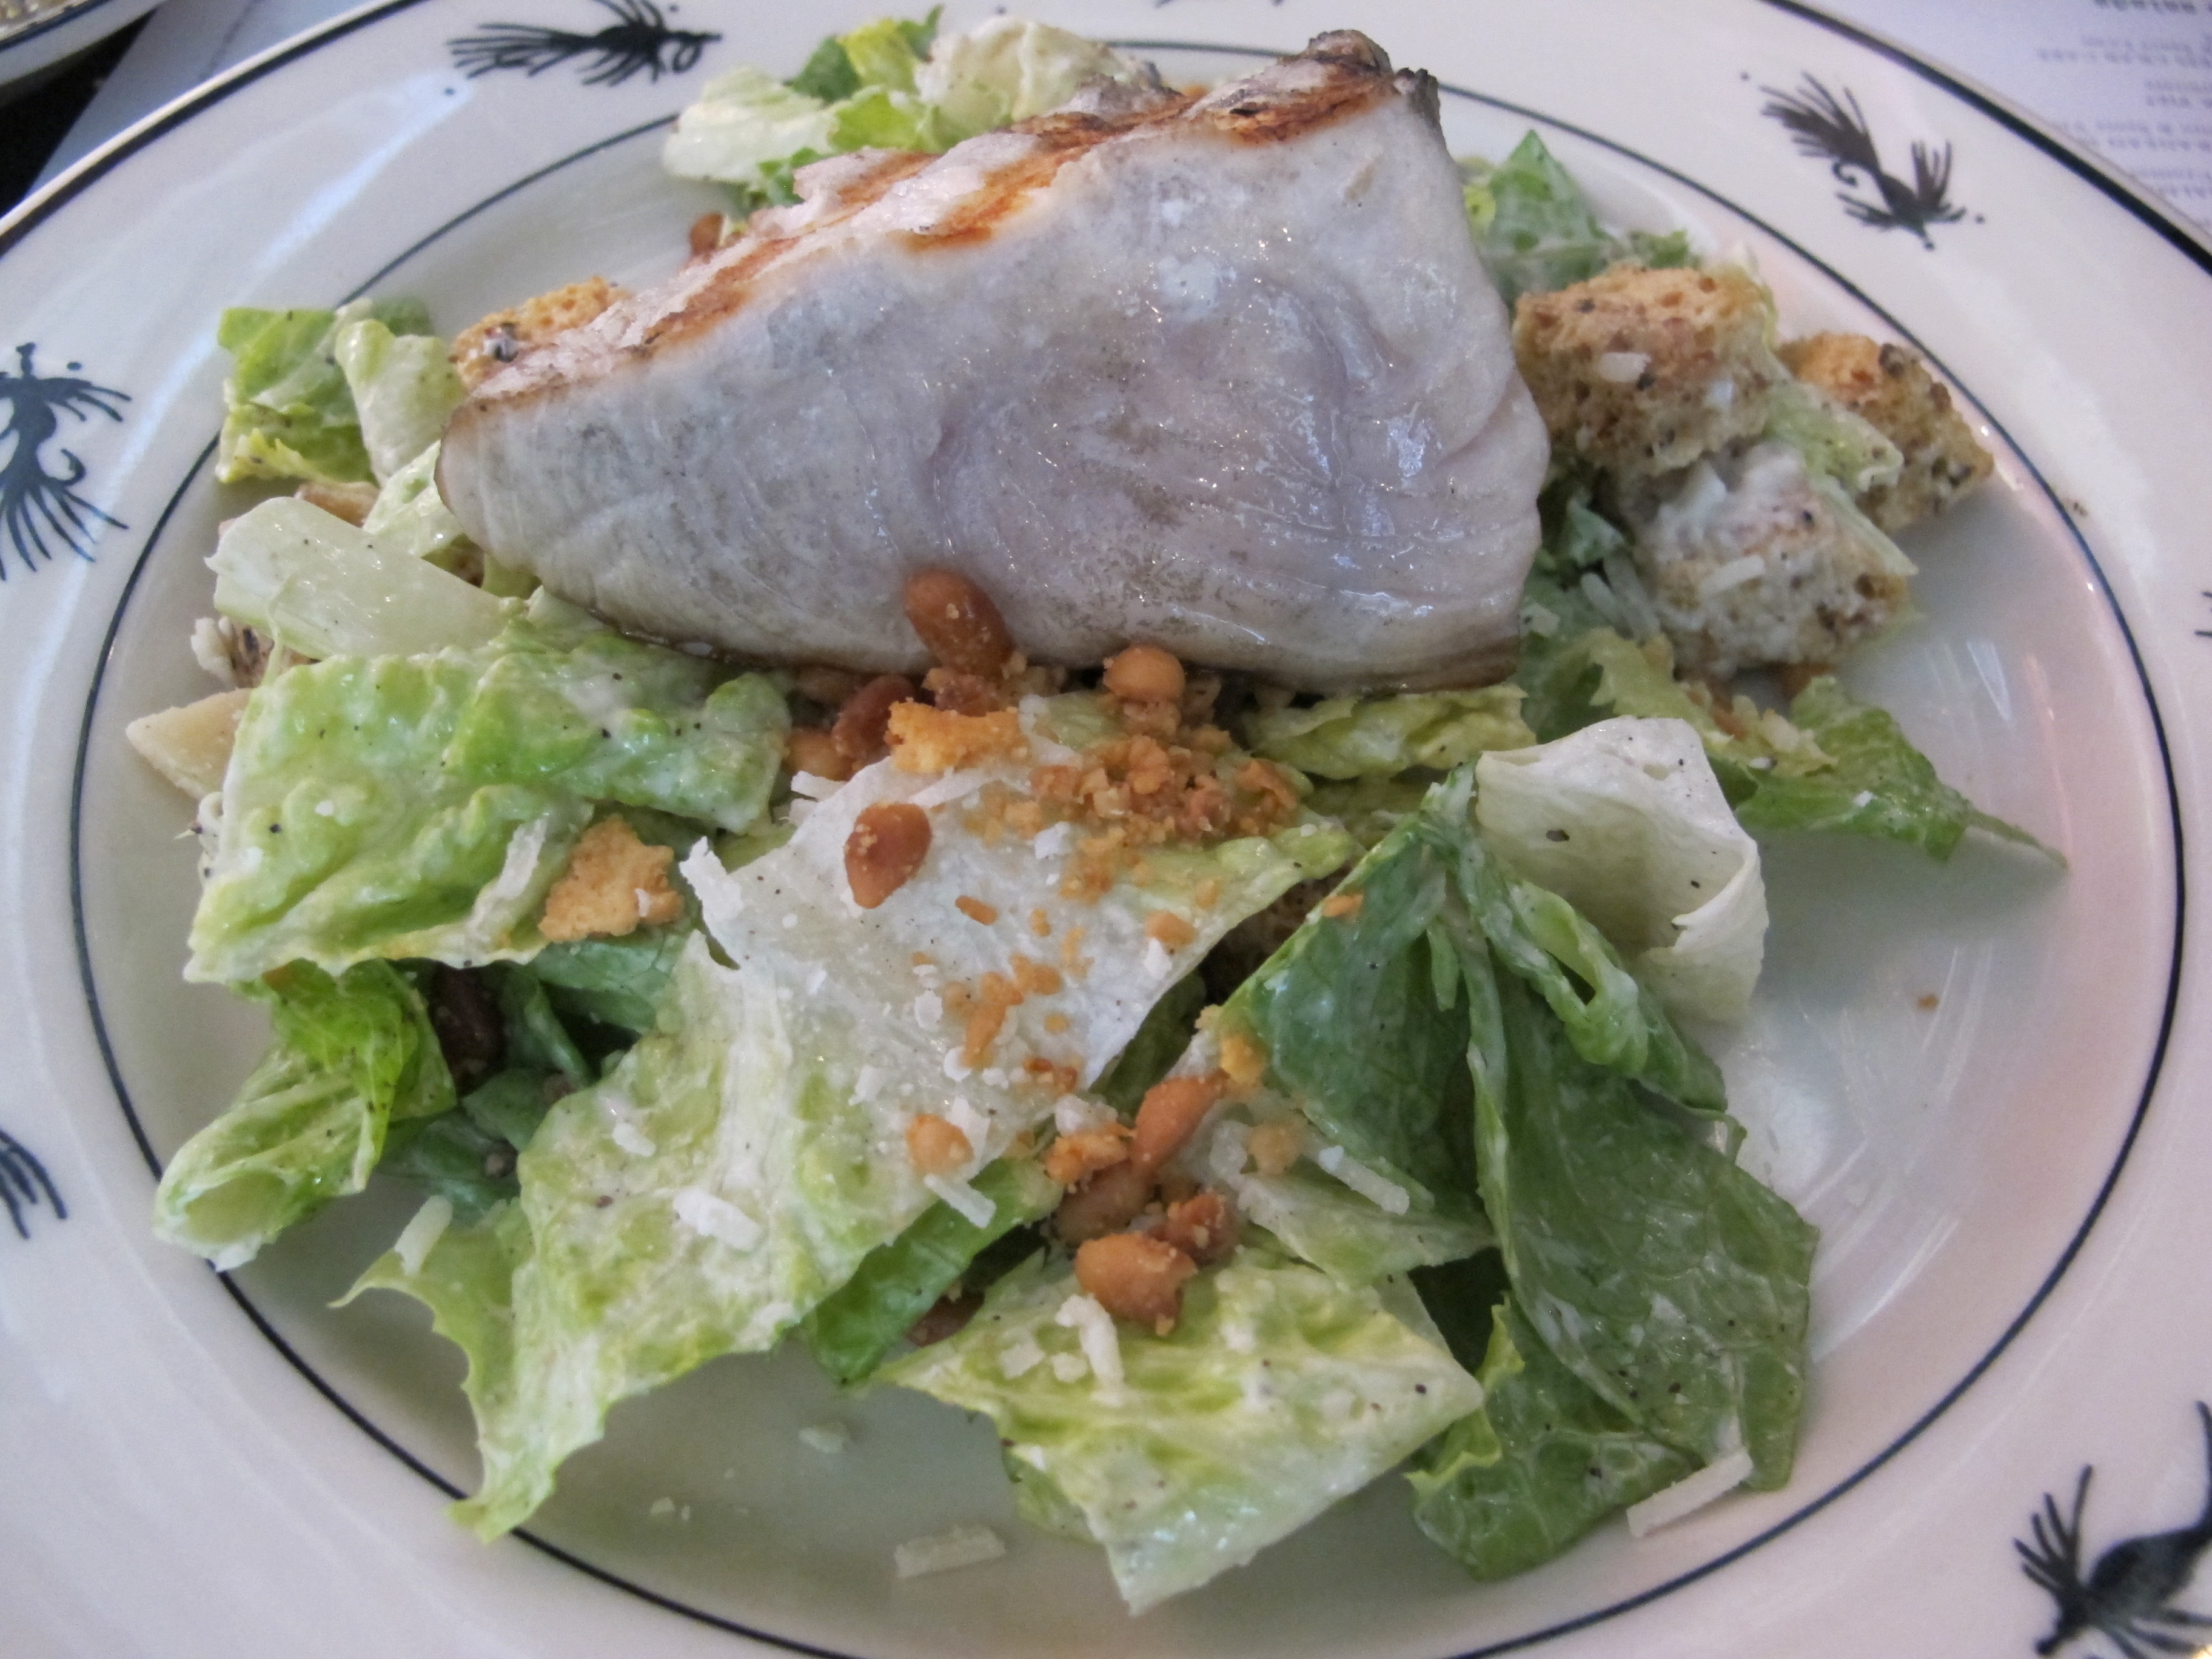 Ivory King salmon on a bed of salad